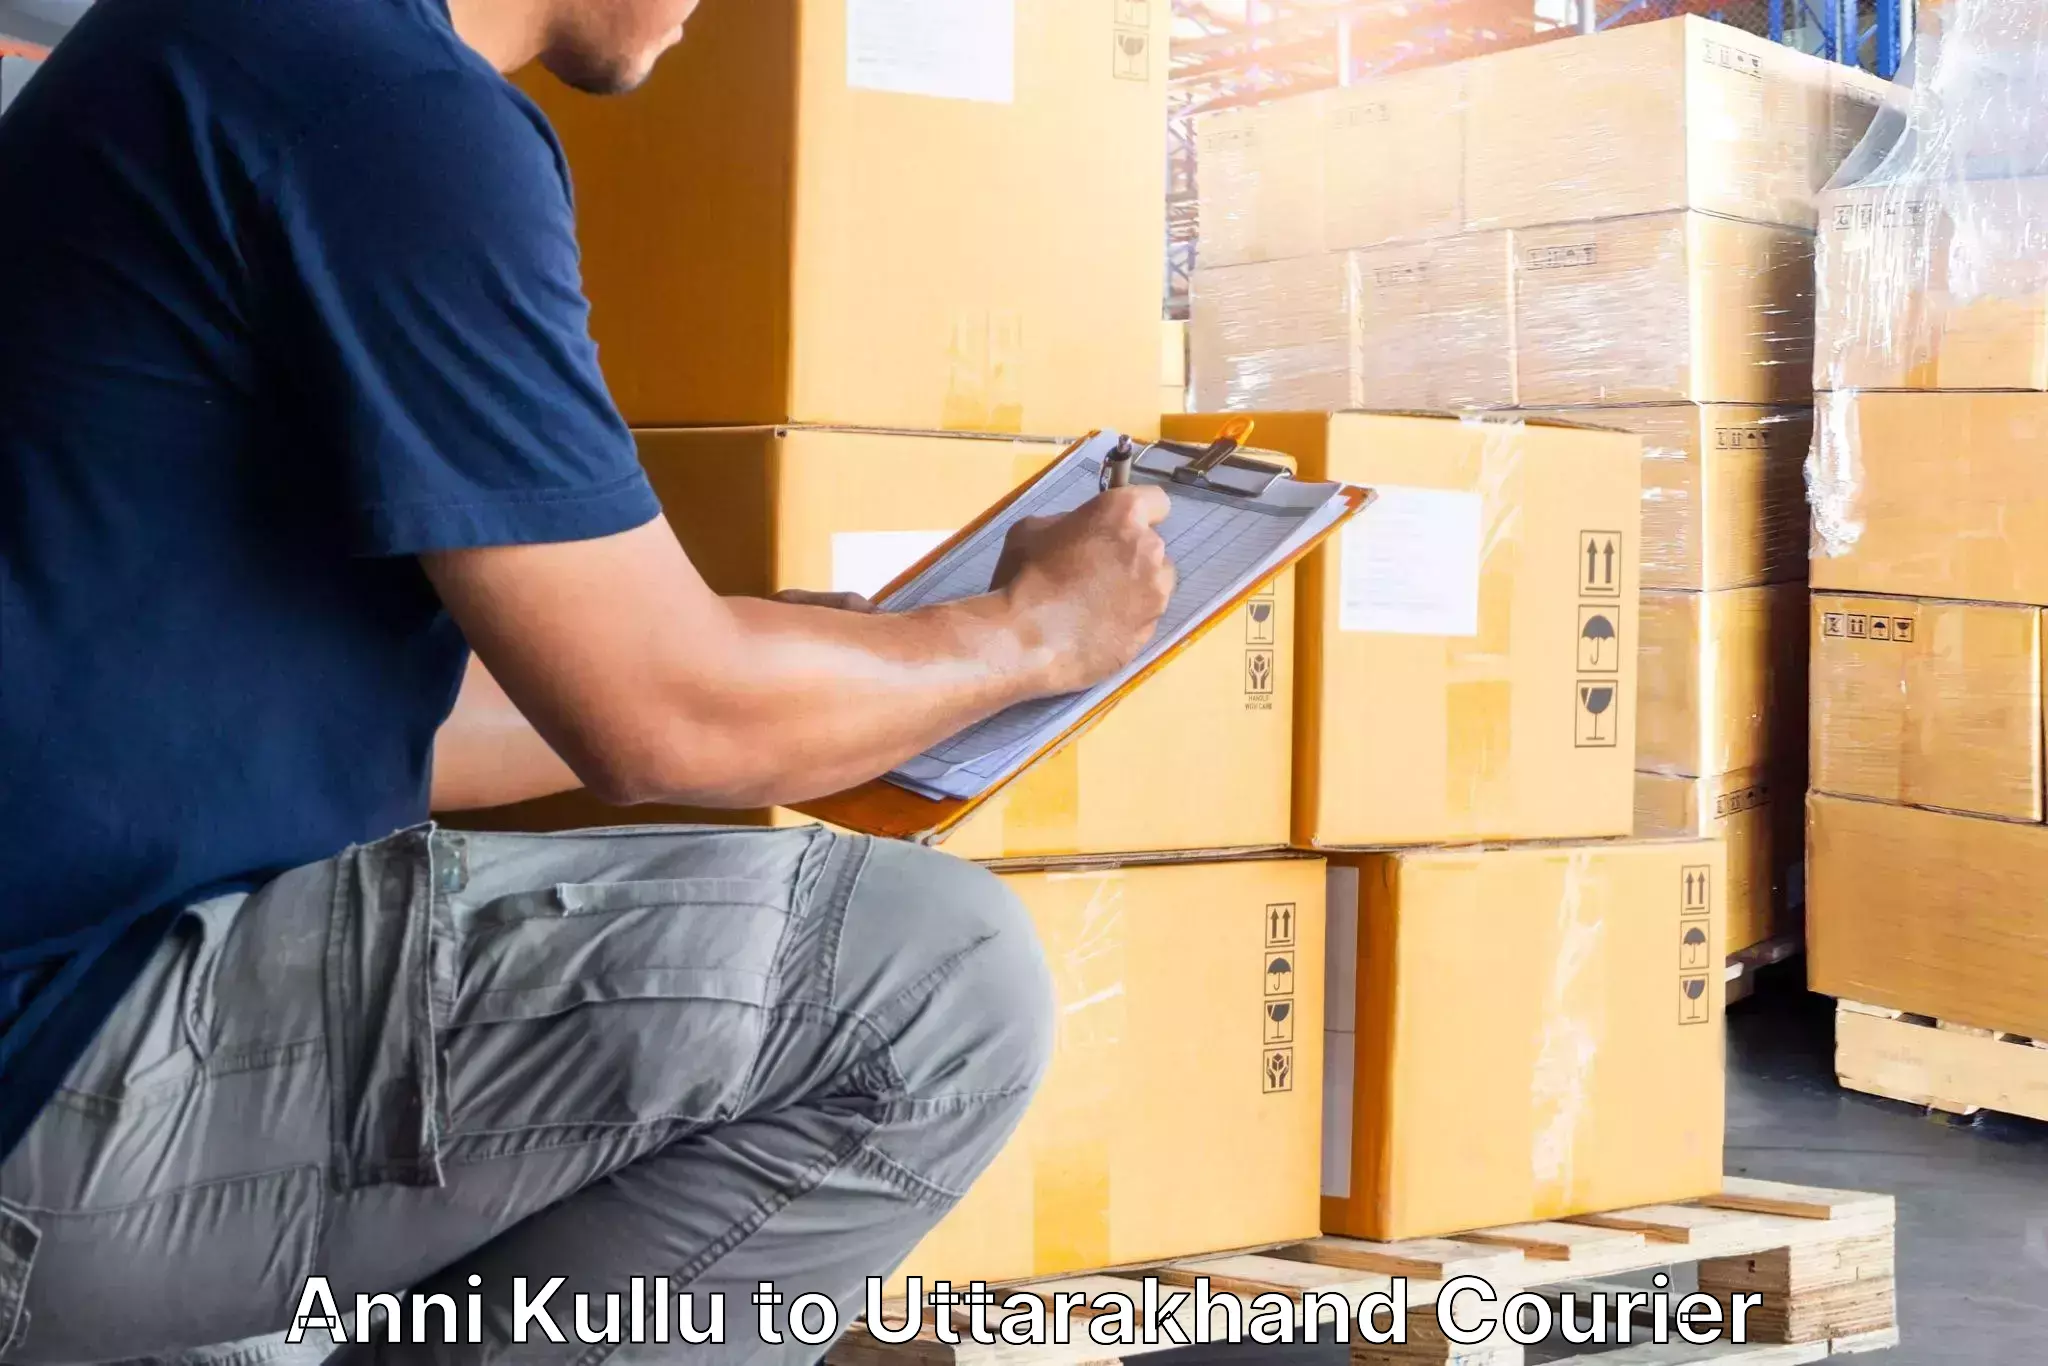 Furniture moving specialists Anni Kullu to Roorkee